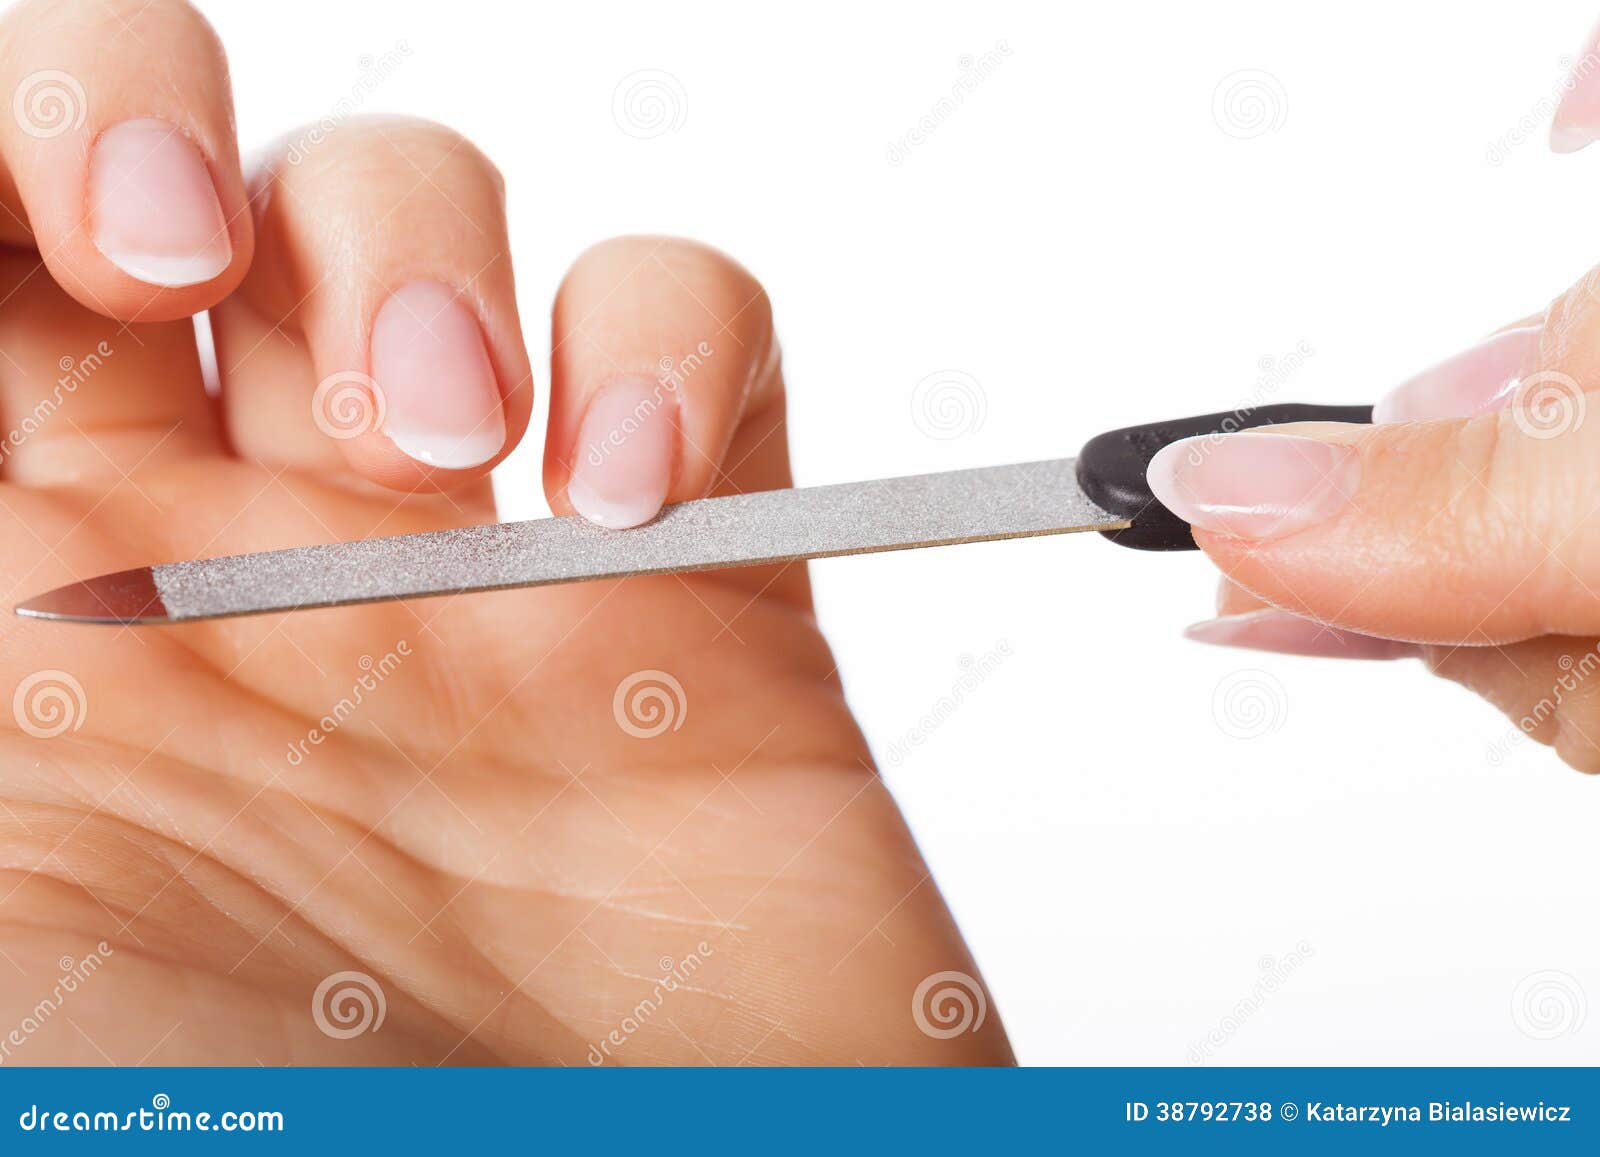 hands with nailfile